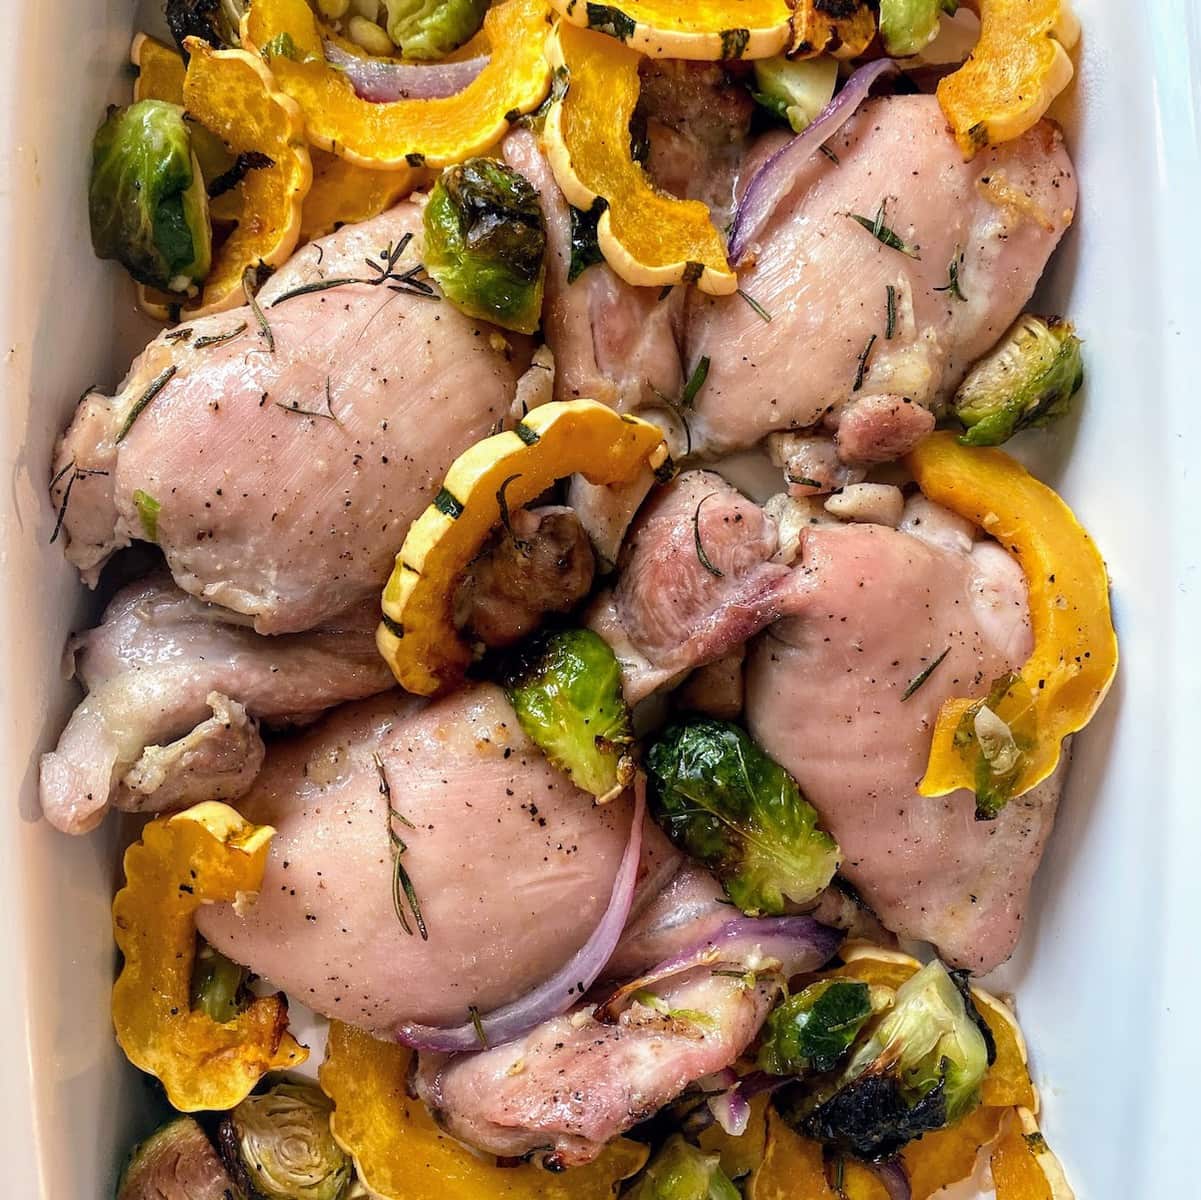 chicken, squash and brussels sprouts dish